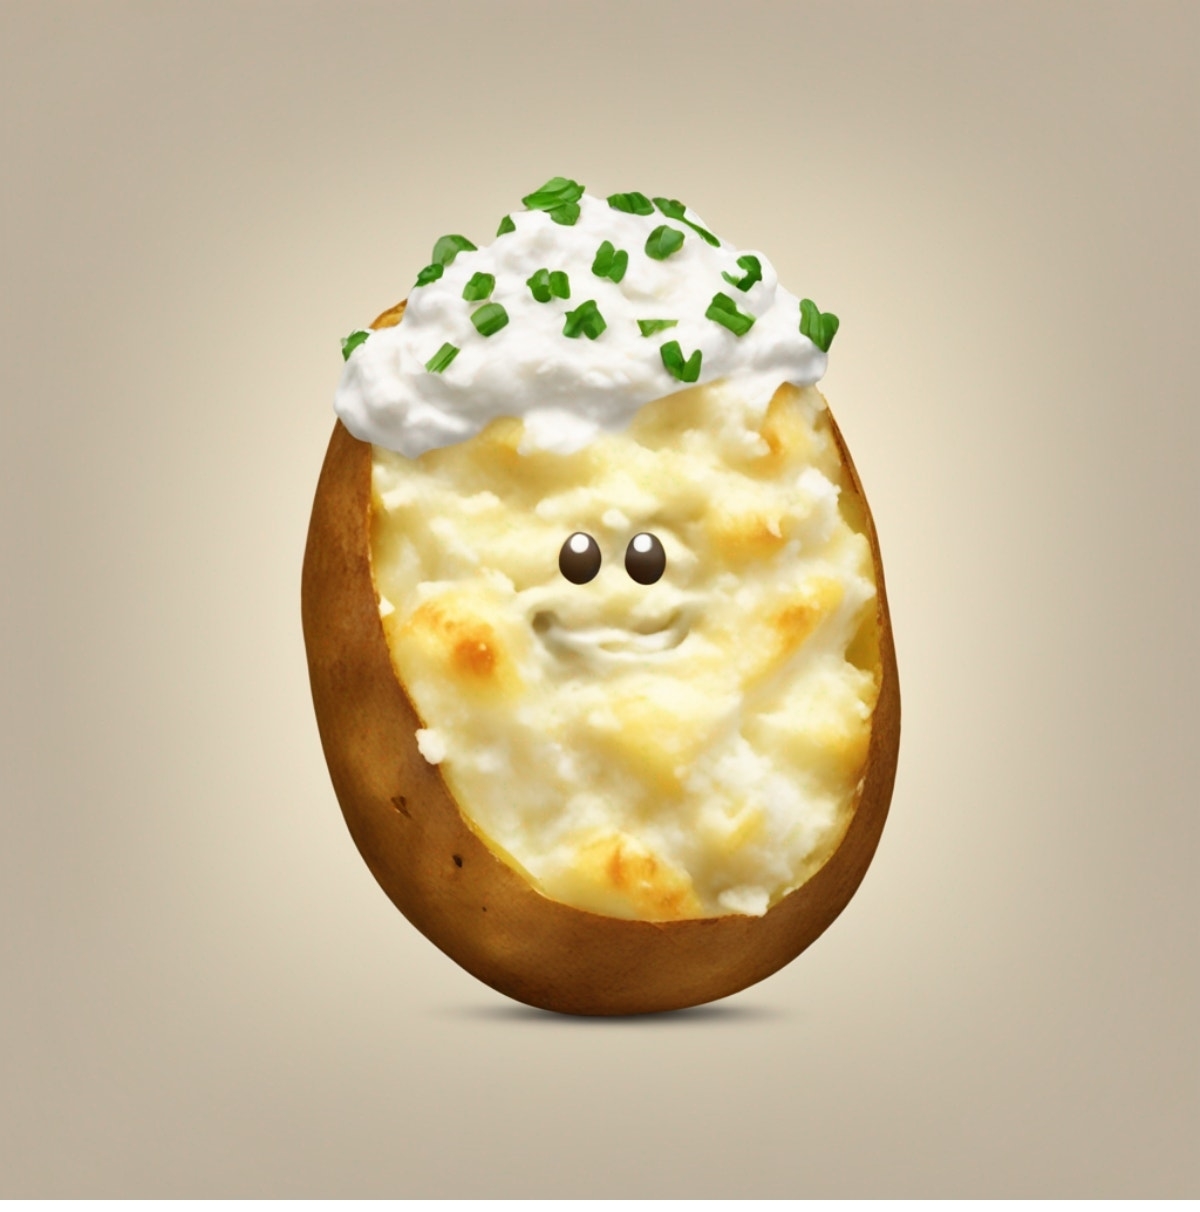 Illustration of a smiling cartoon potato with sour cream and chives on top